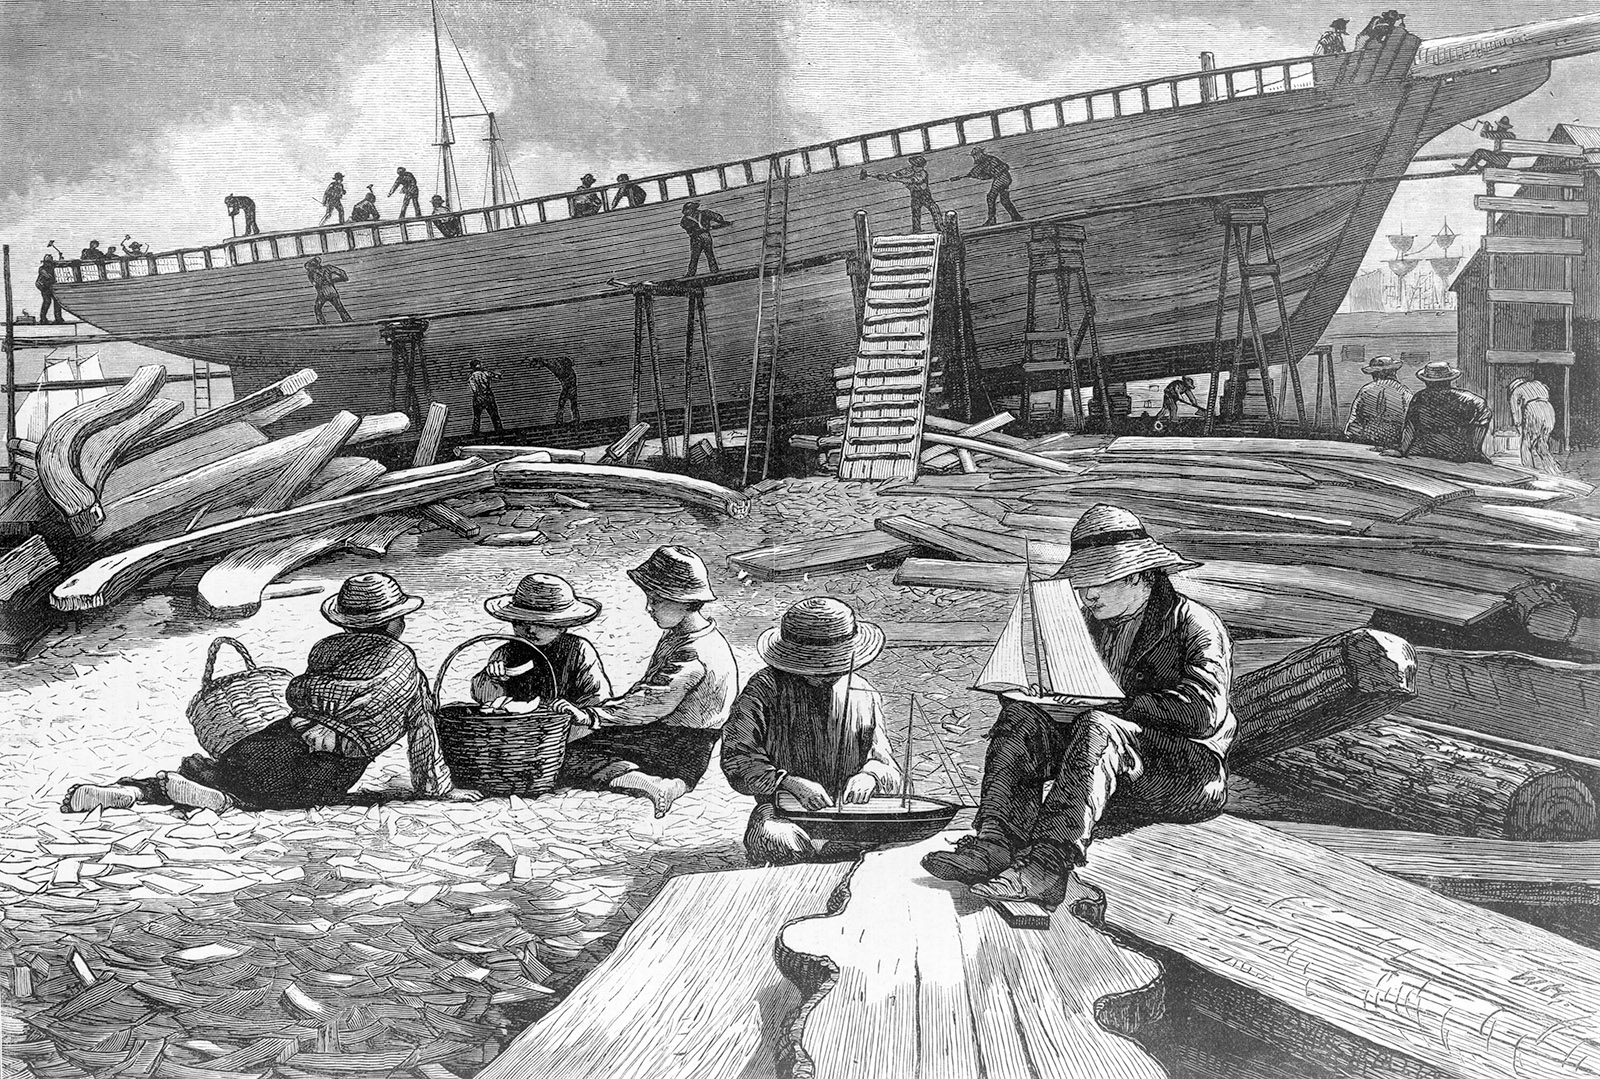 Shipbuilding, etching by Winslow Homer